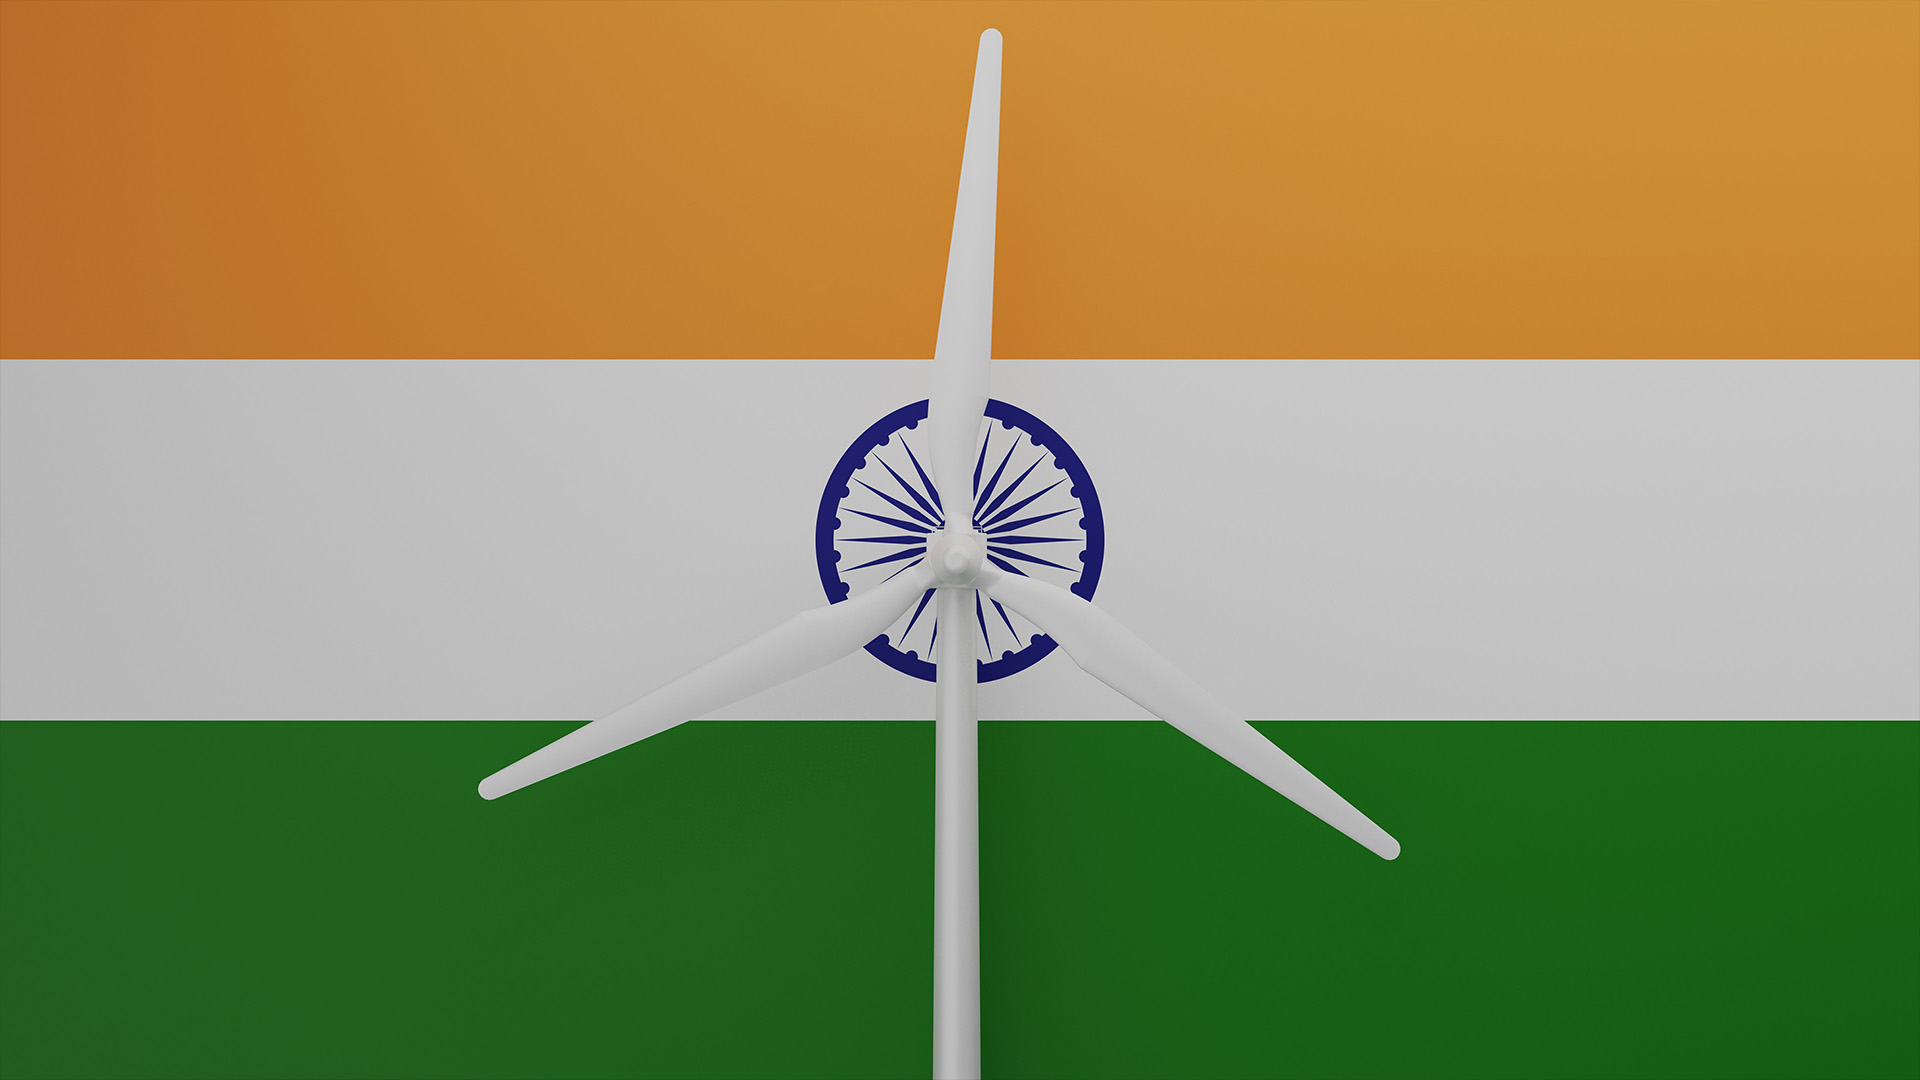 Large wind turbine in center with a background of the country flag of India